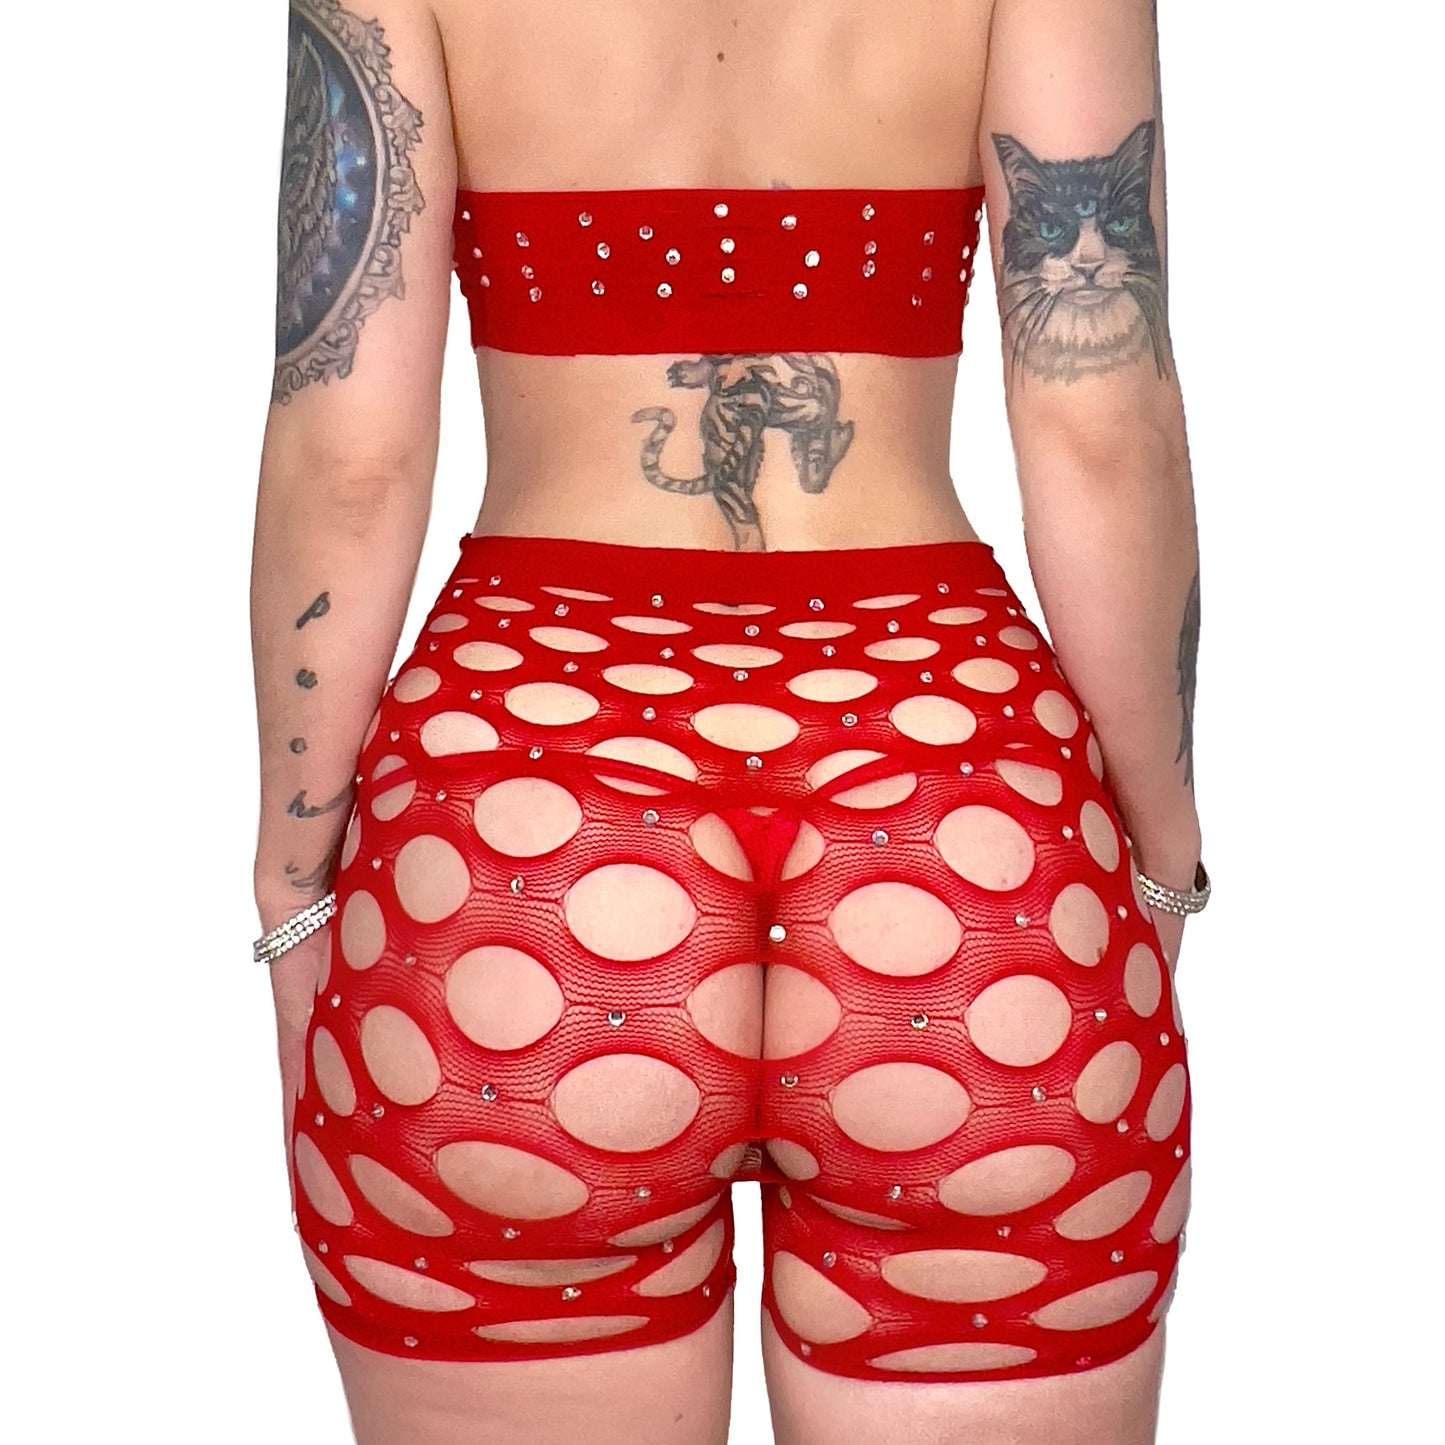 Icy Doll Bedazzled Shorts Set: Red